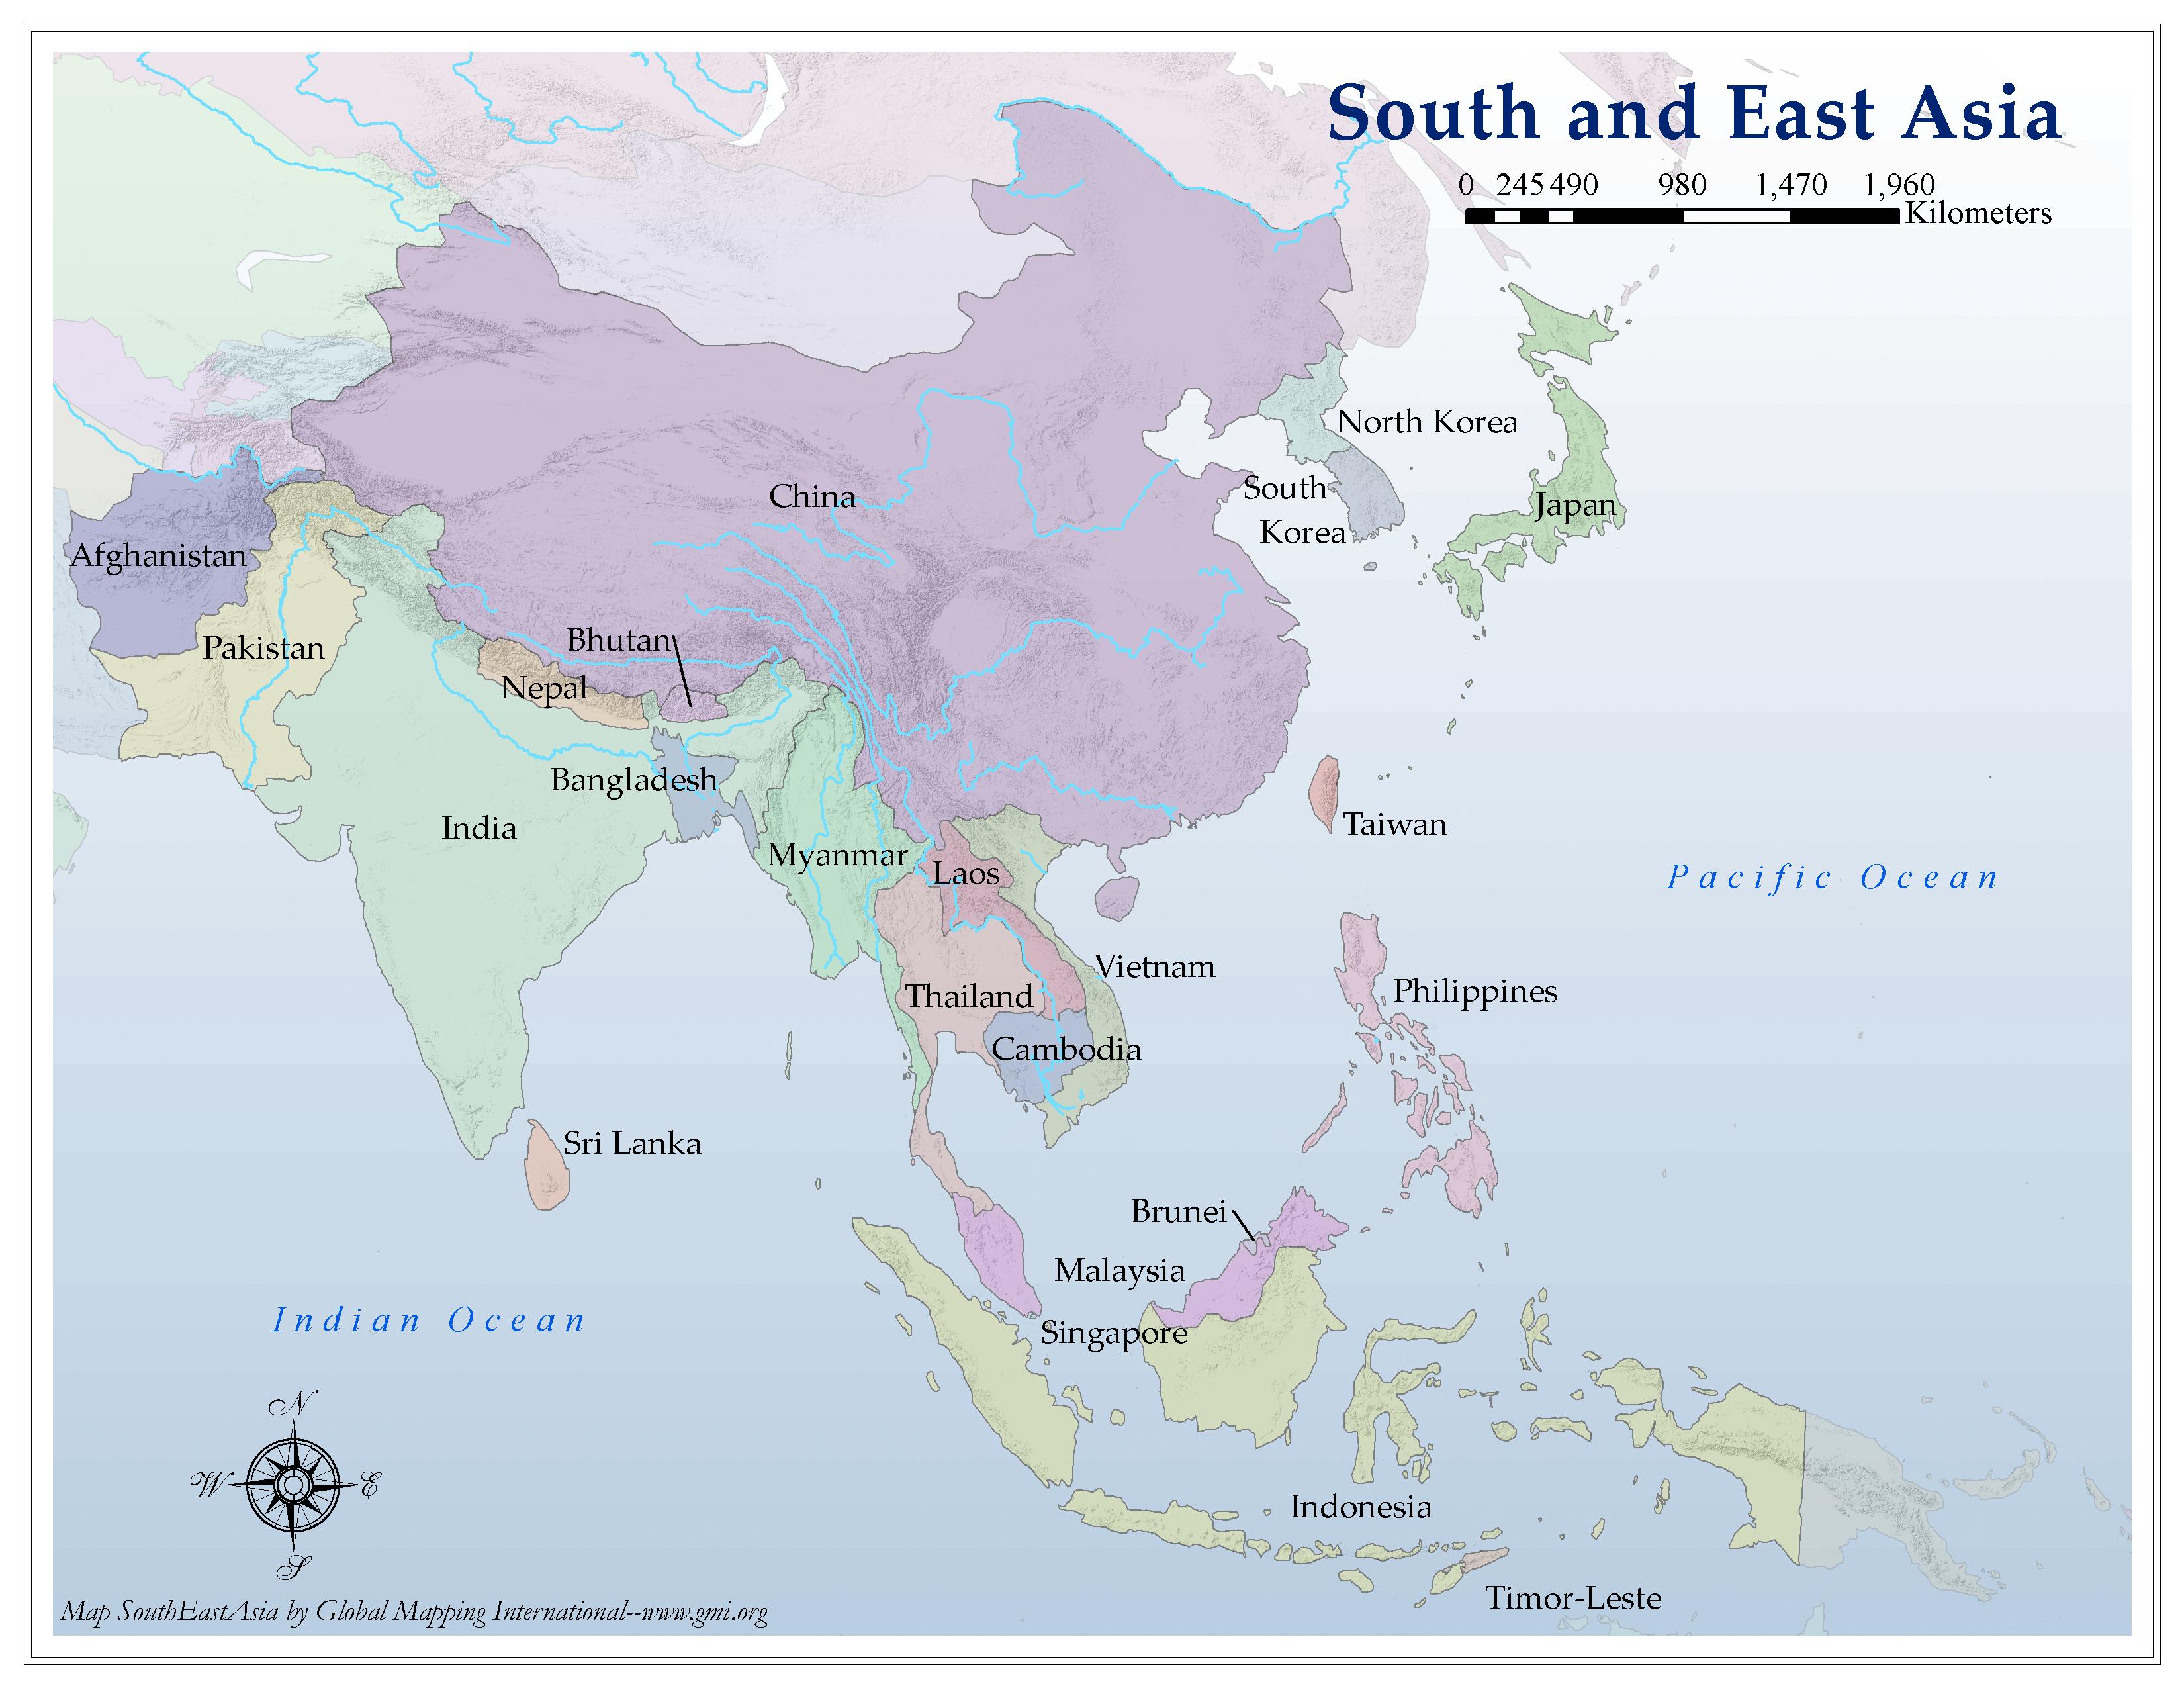 South and East Asia